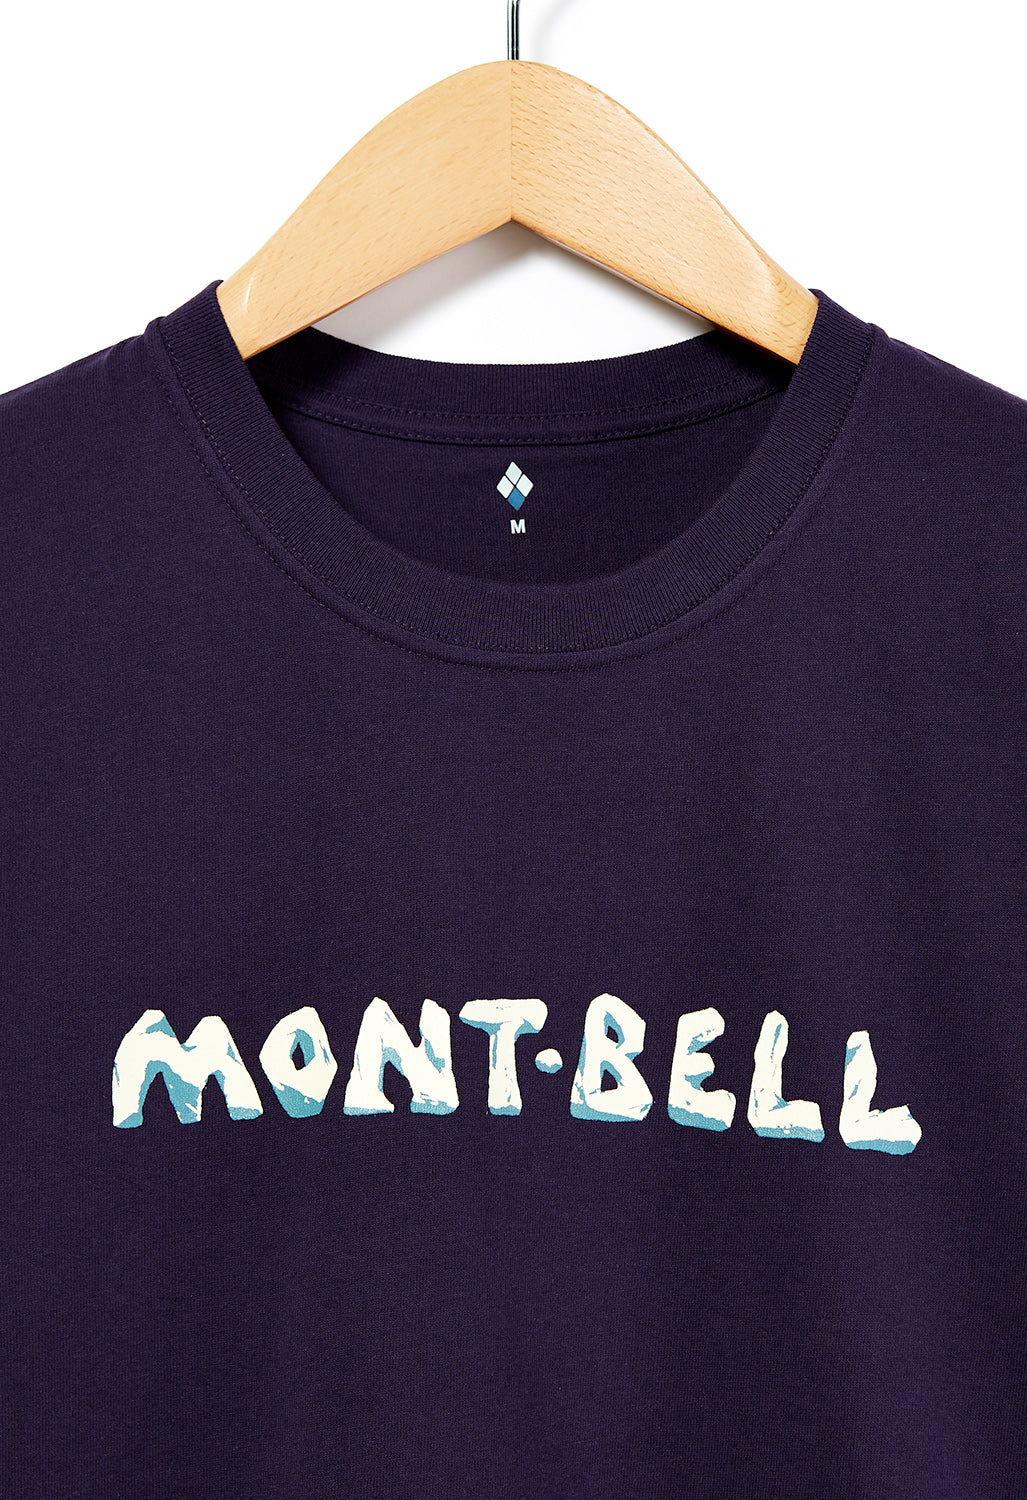 Montbell Pear Skin Cotton mont-bell Iwa Logo T-Shirt - Purple Navy